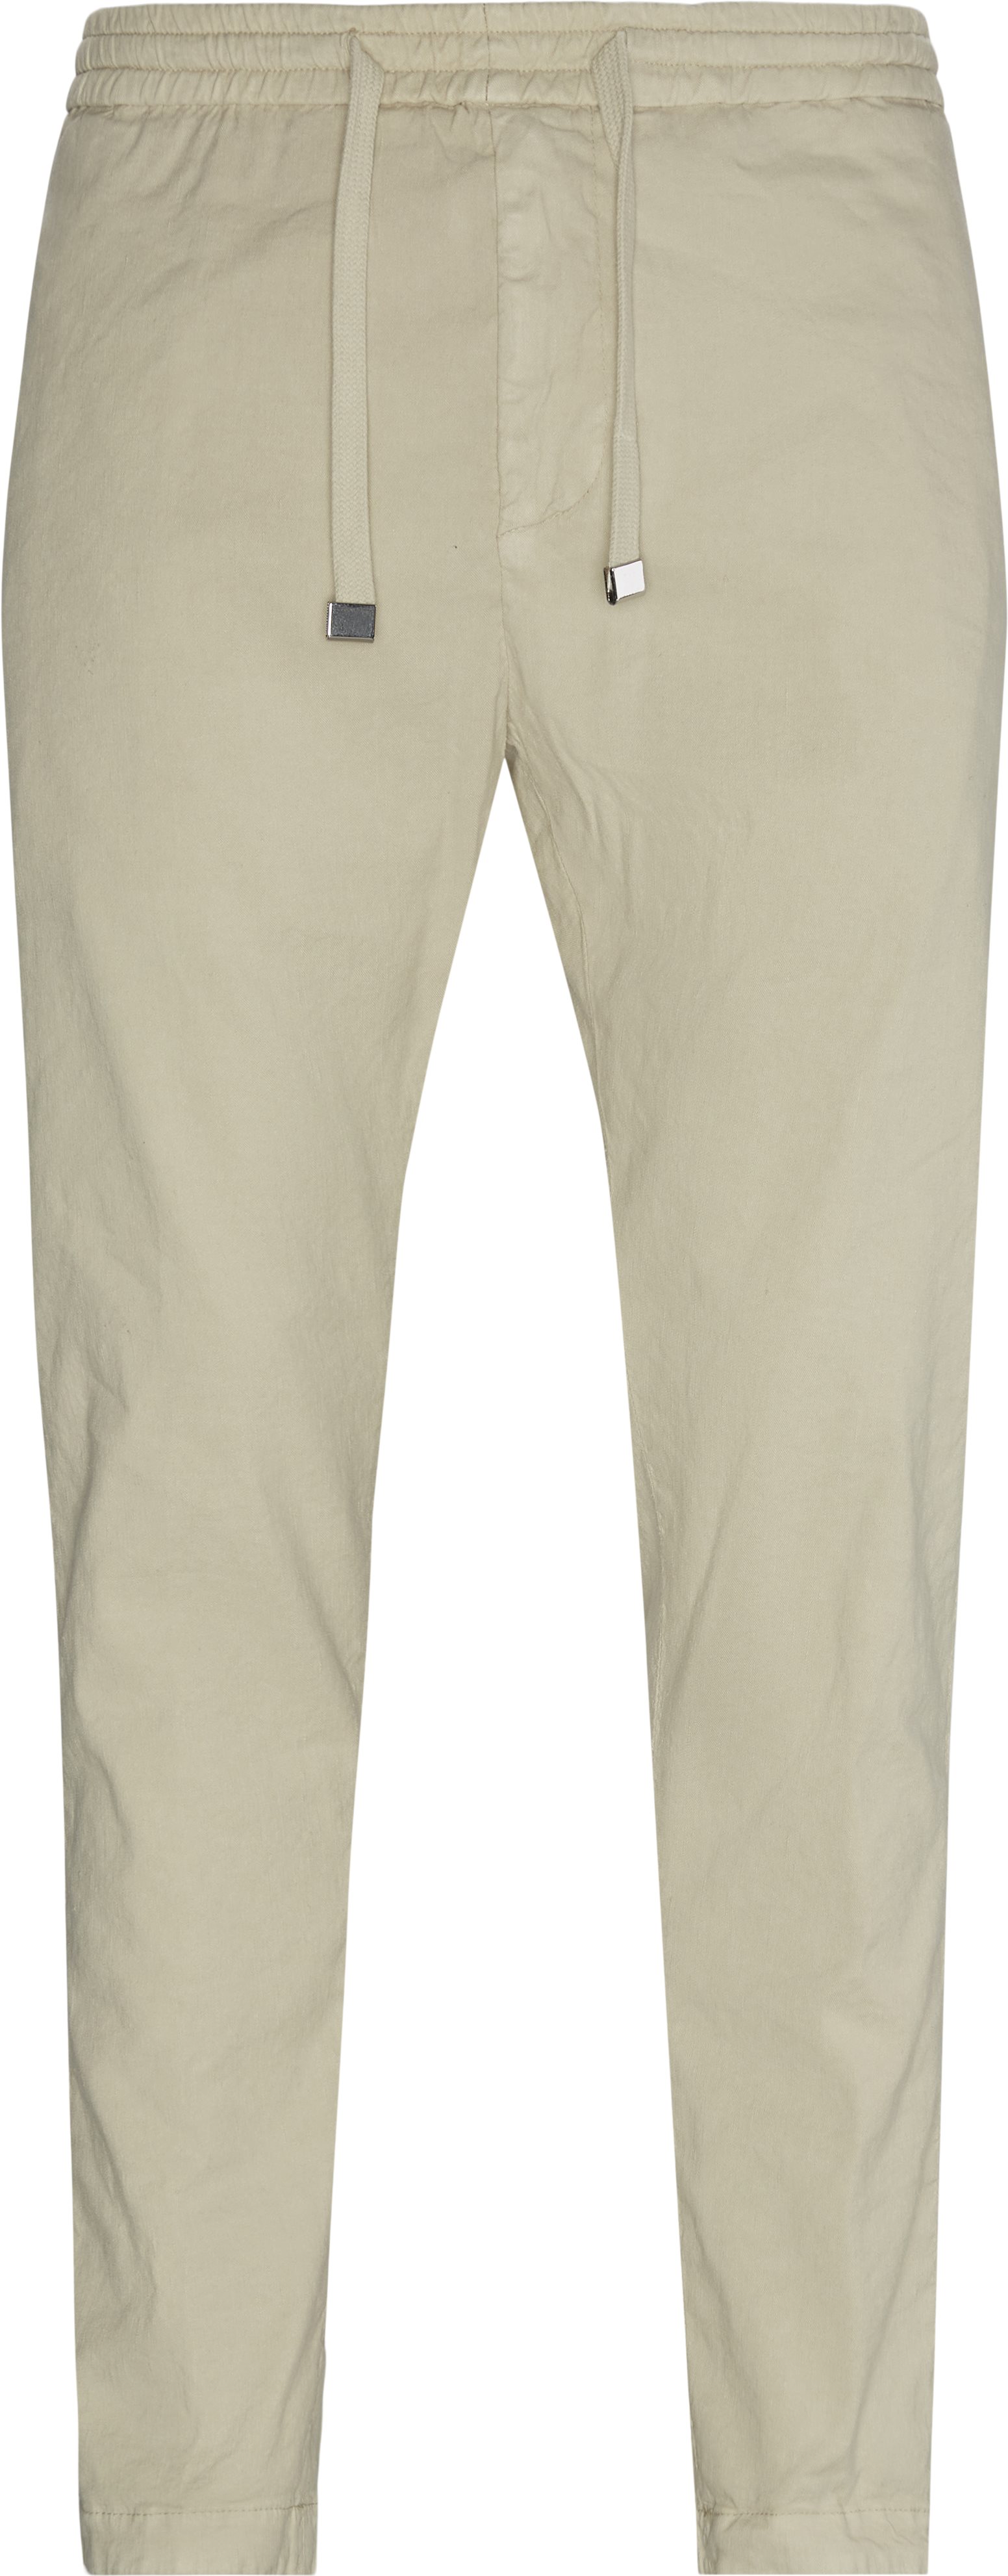 Trousers - Loose fit - Sand